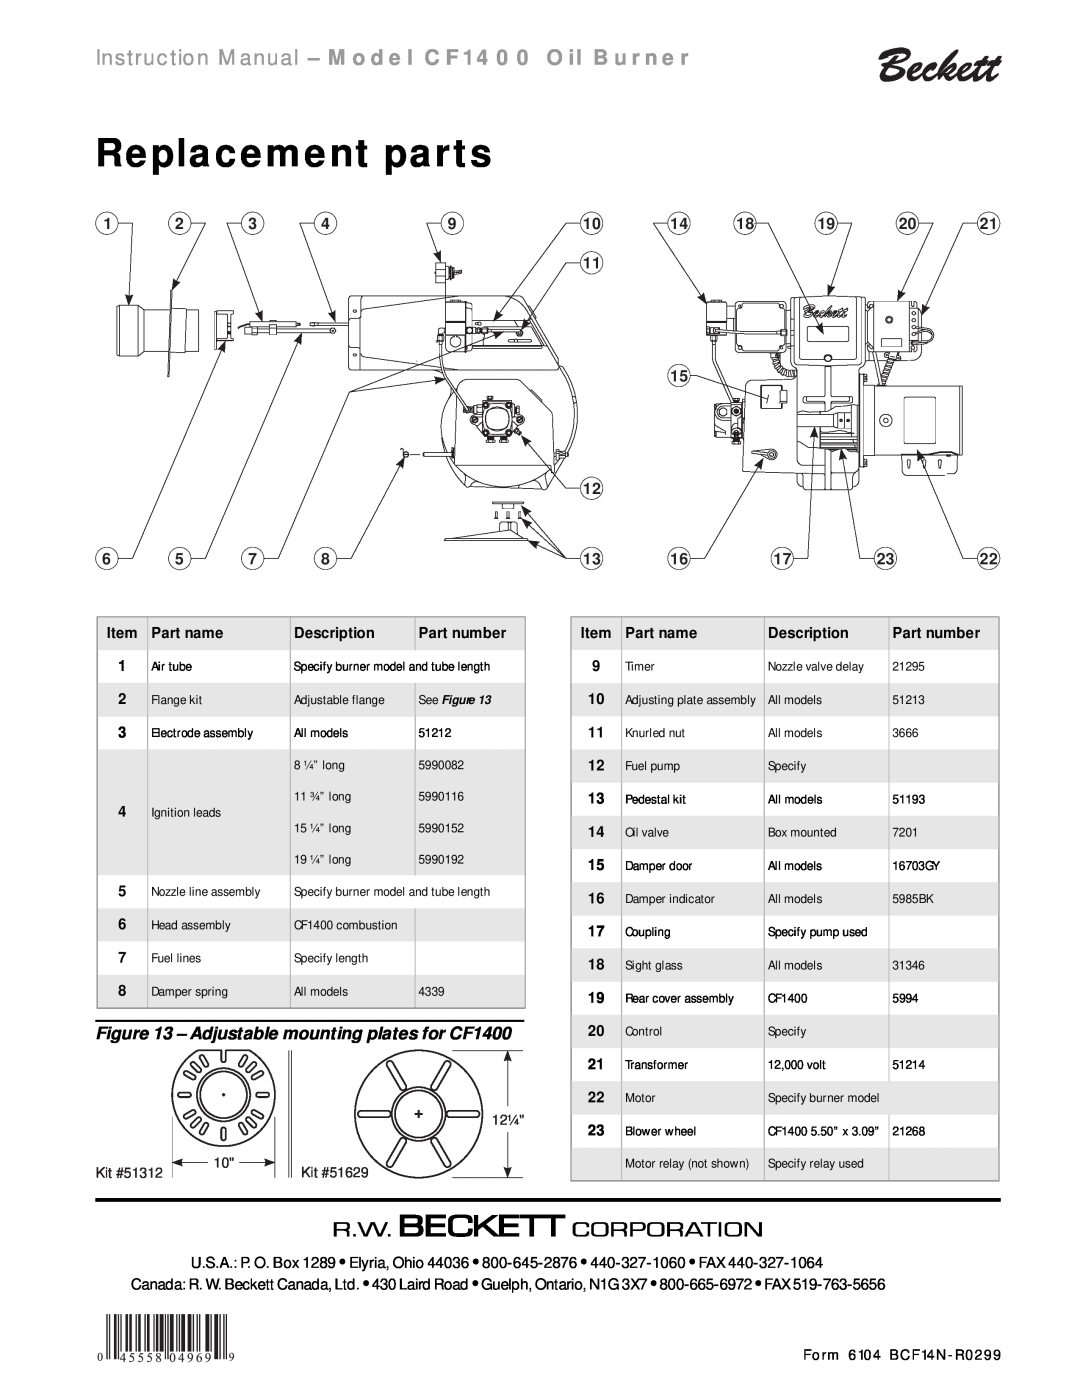 Beckett CF 1400 instruction manual Replacement parts, Adjustable mounting plates for CF1400 